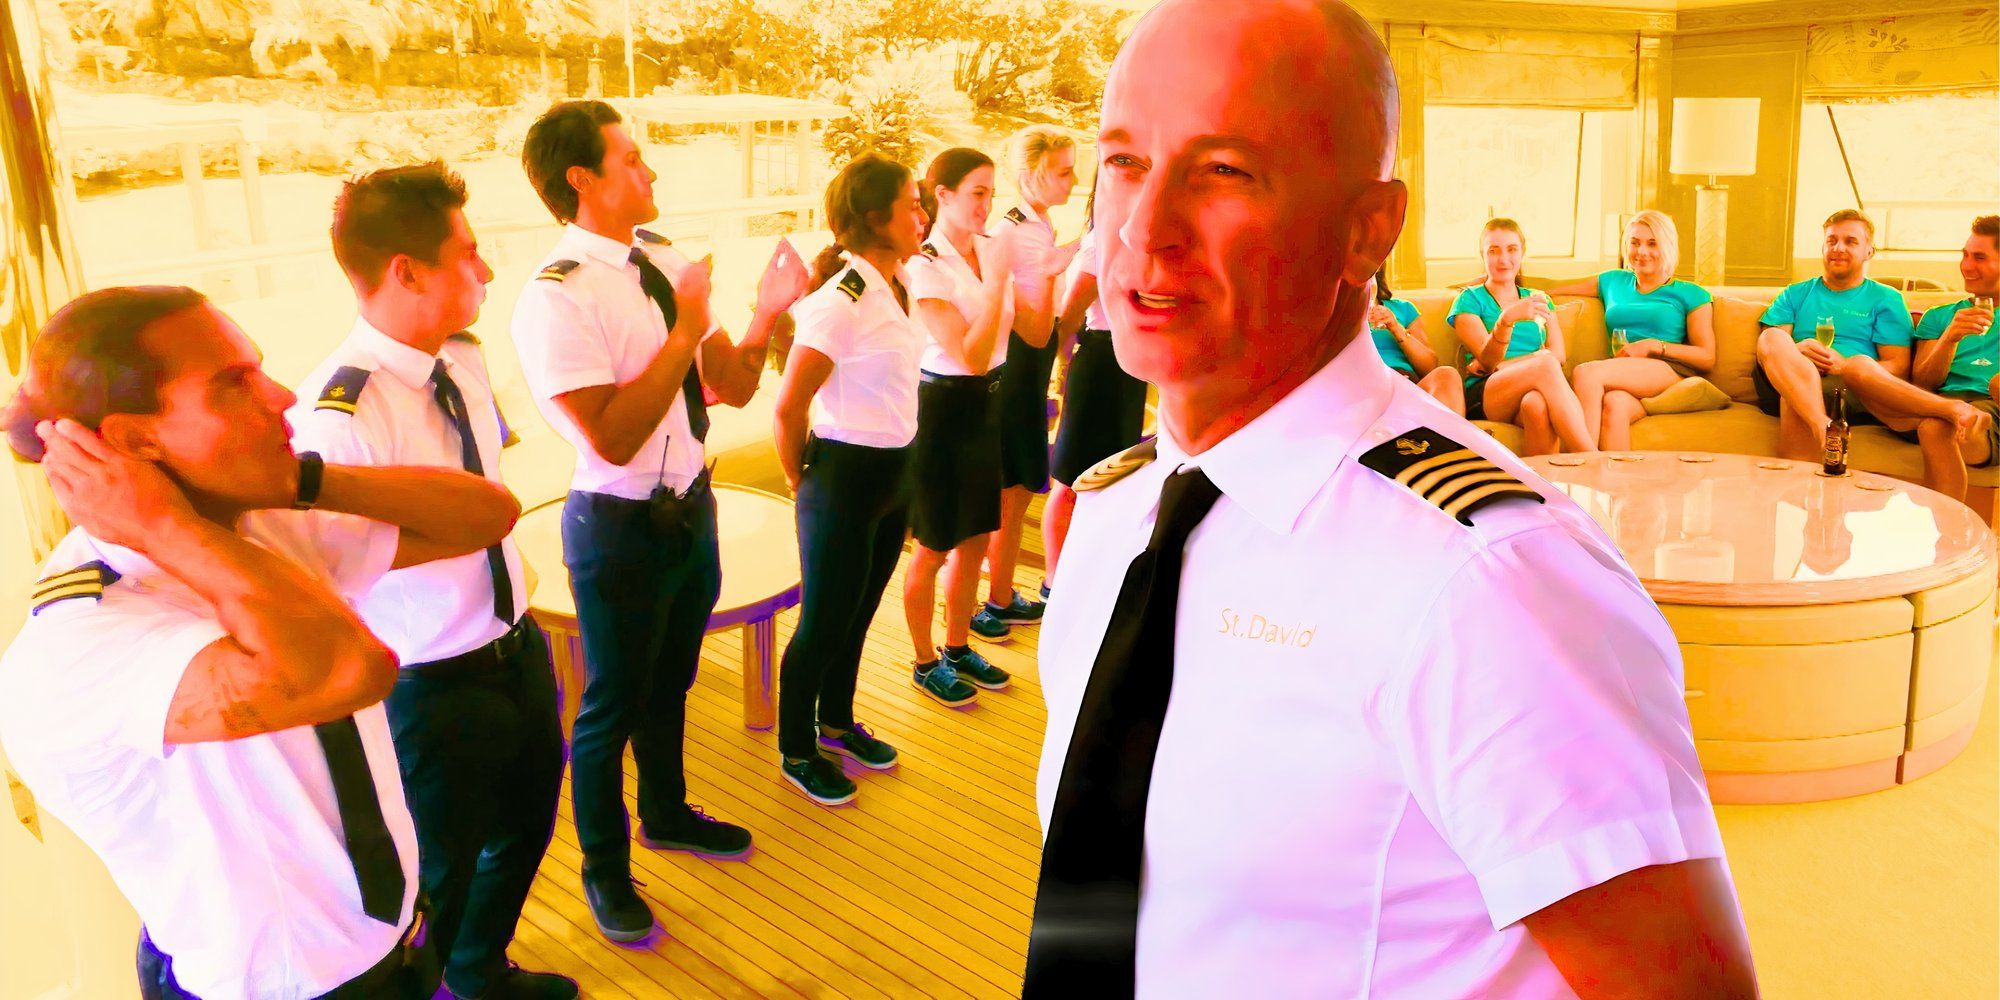 Below Deck Season 11 cast montage with kerry at the front